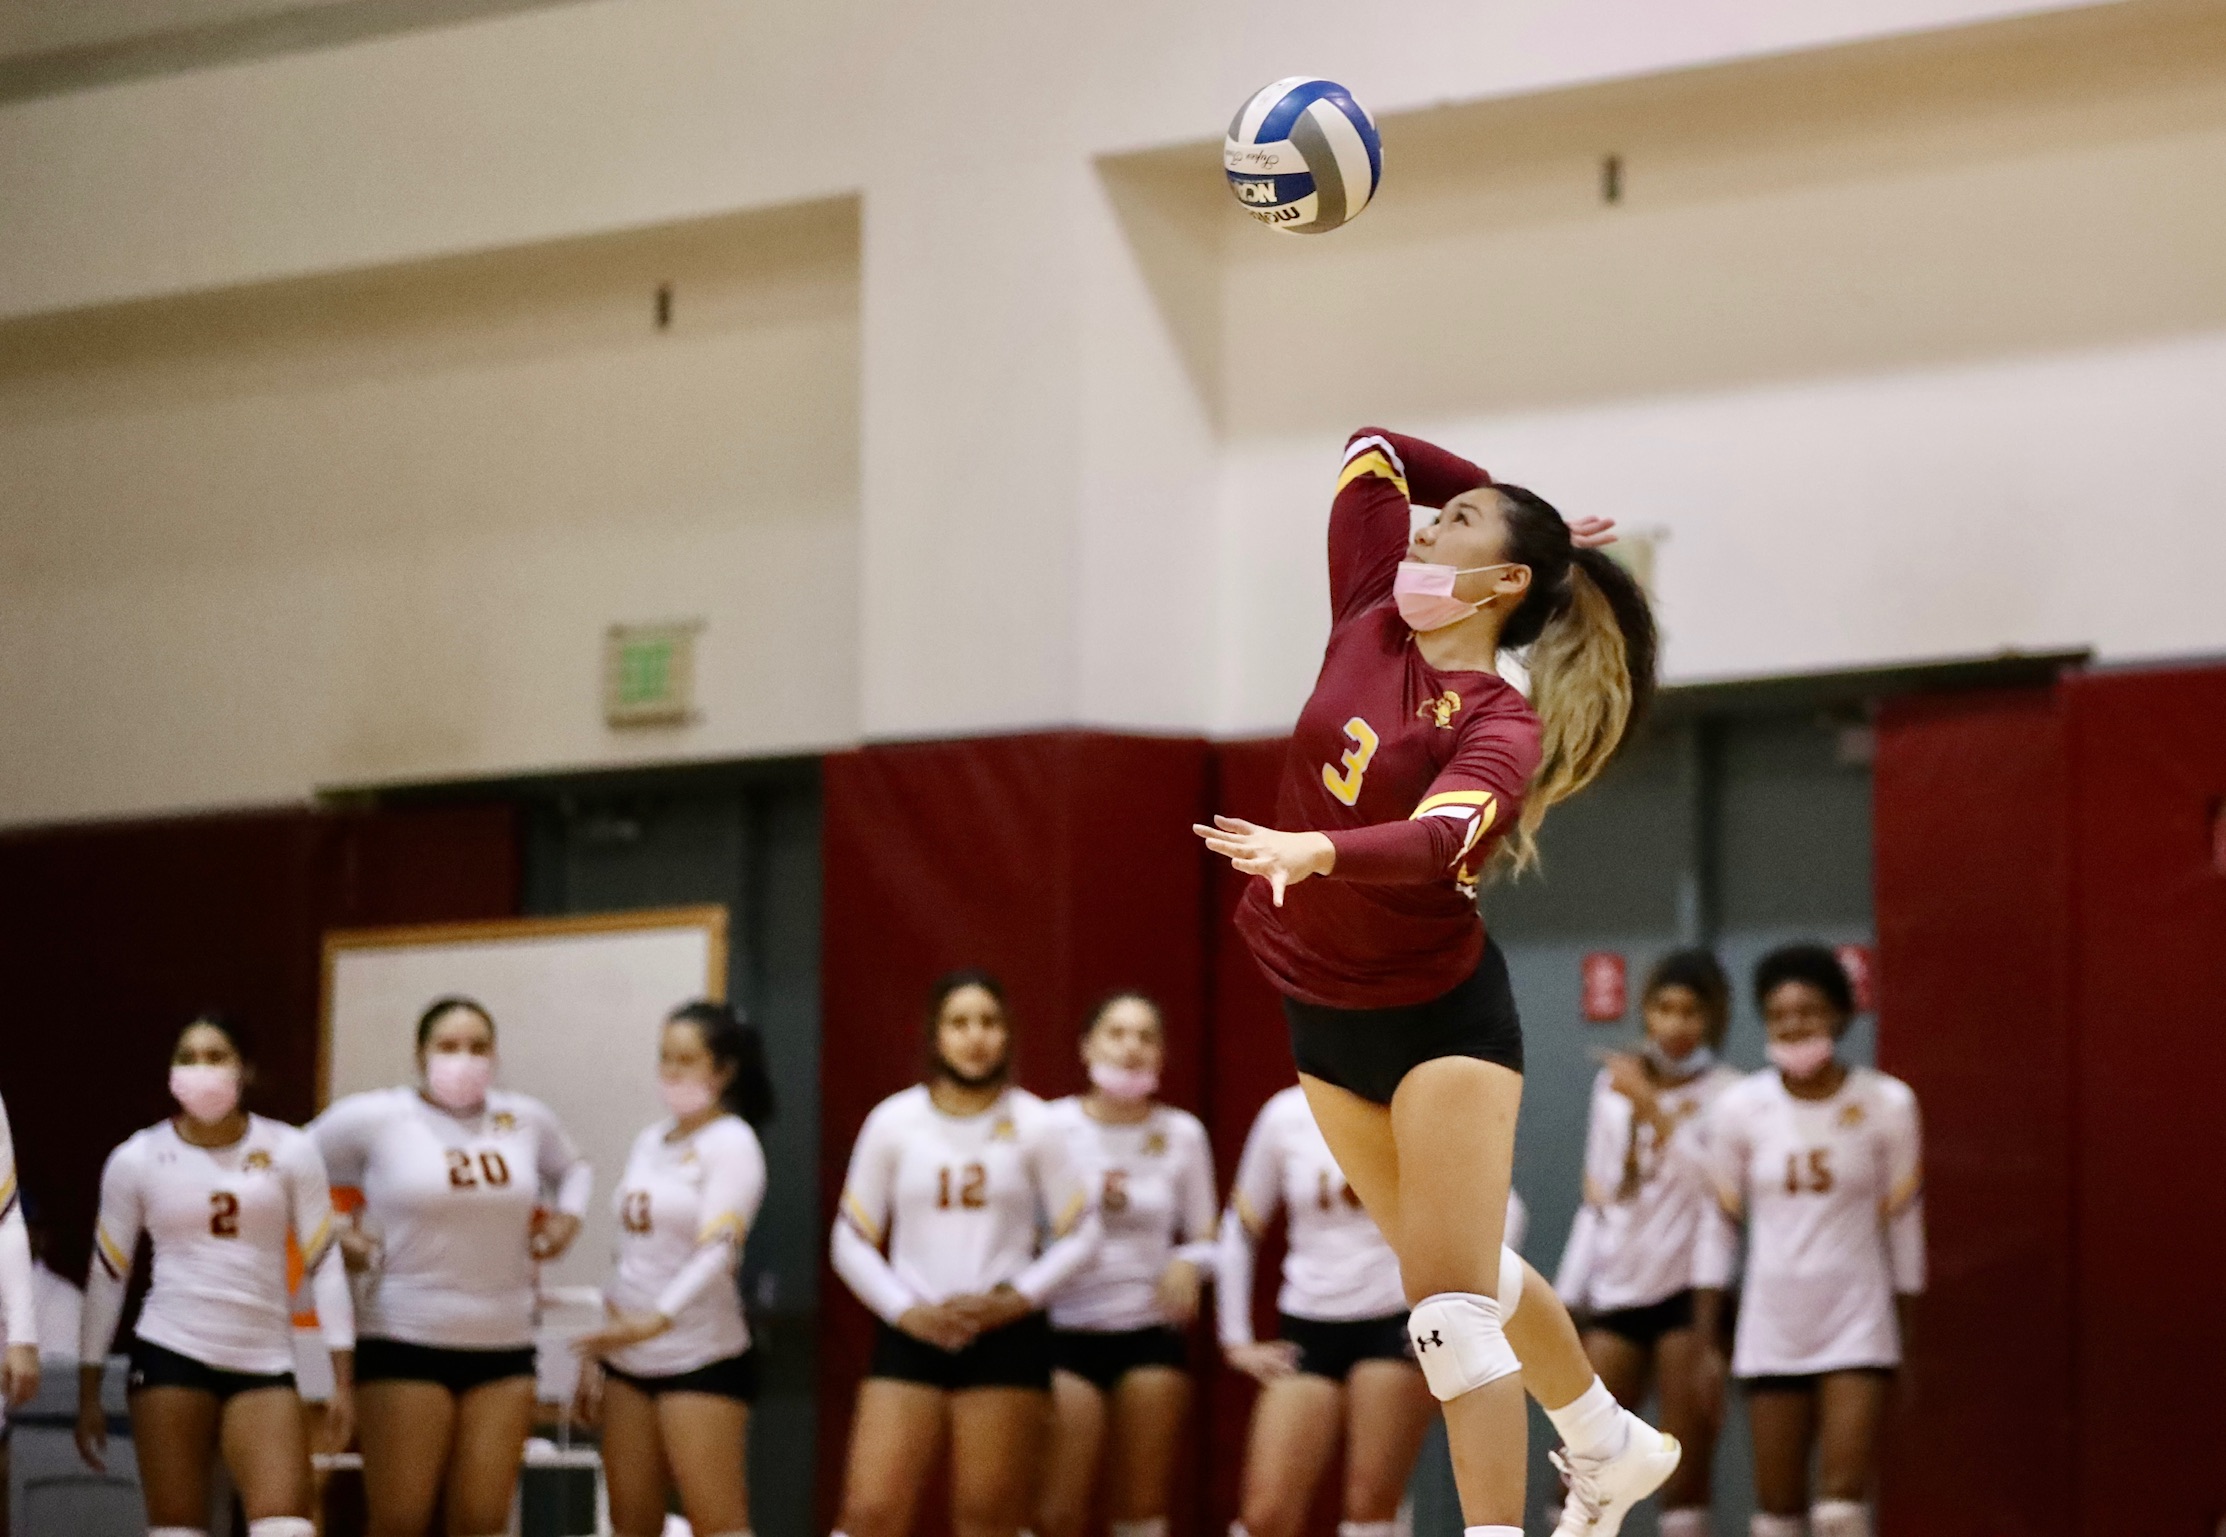 Kei'ana Pascua makes a jump serve during last night's win over El Camino (photo by Michael Watkins).